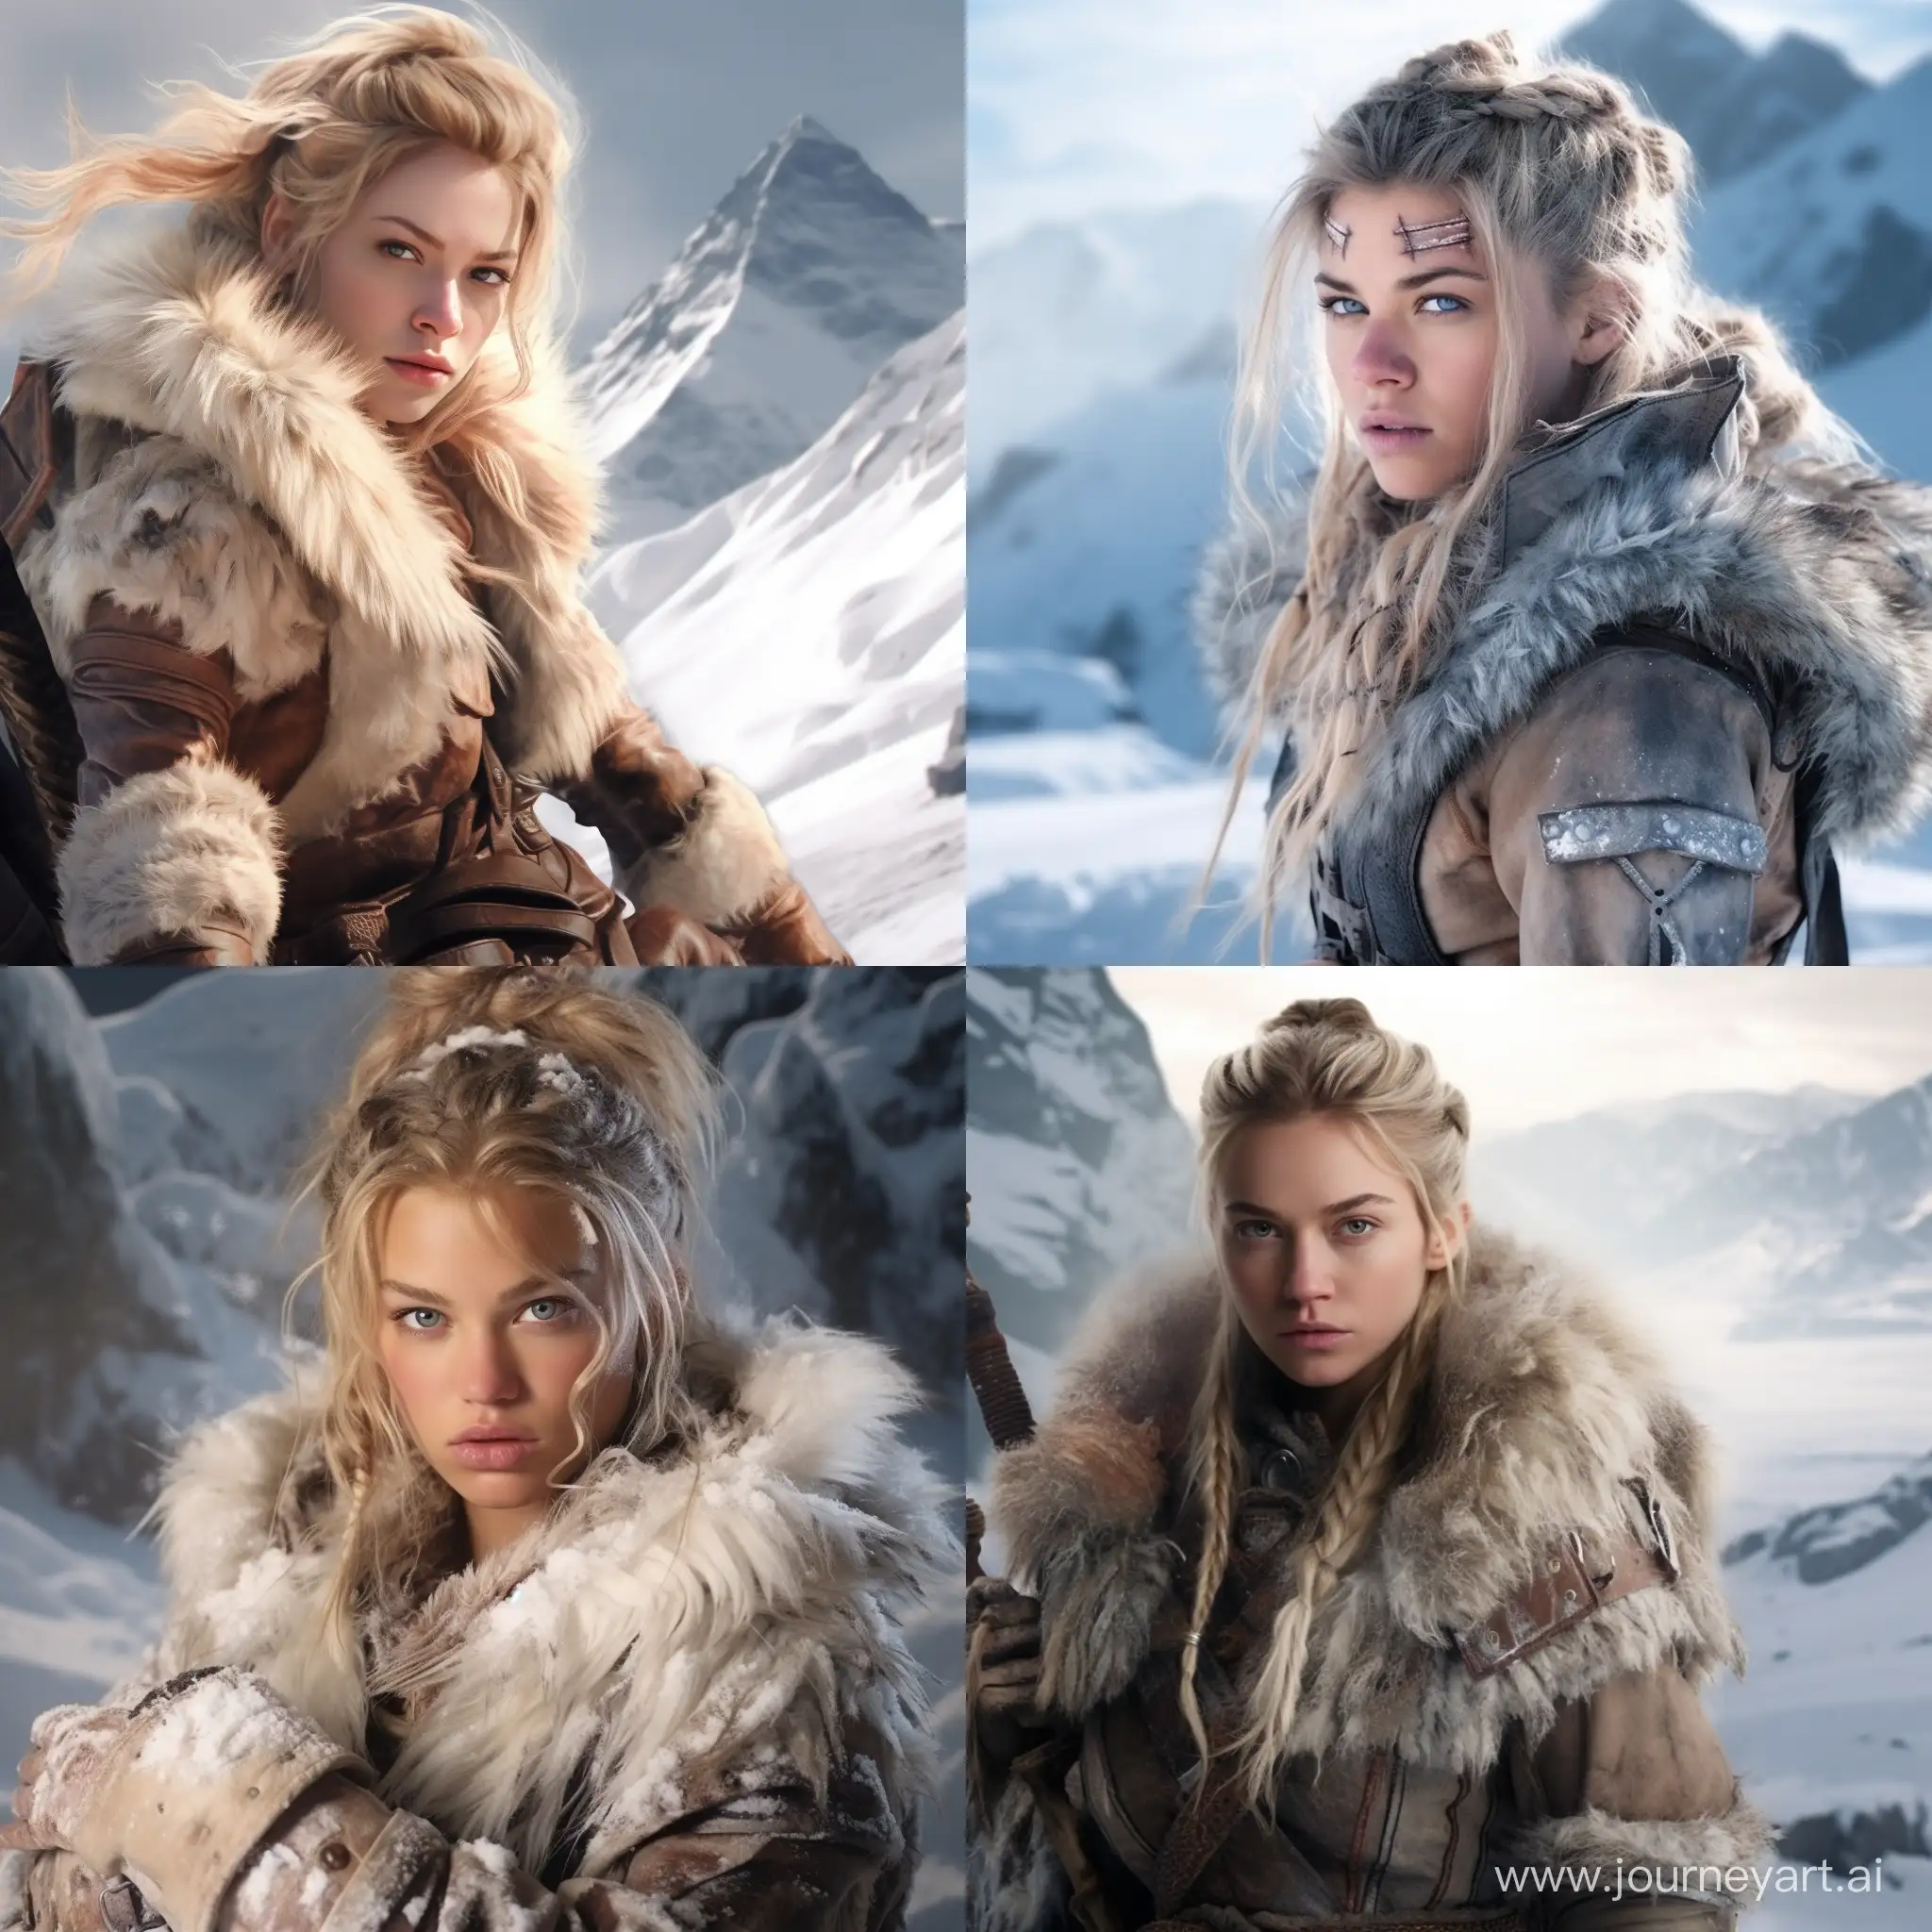 Blonde girl. Hairstyle with a ponytail. Dressed in fur clothes. In the hands of Combat Combat. Terrible looking girl.Hammer. White eyes. Snow and mountains.